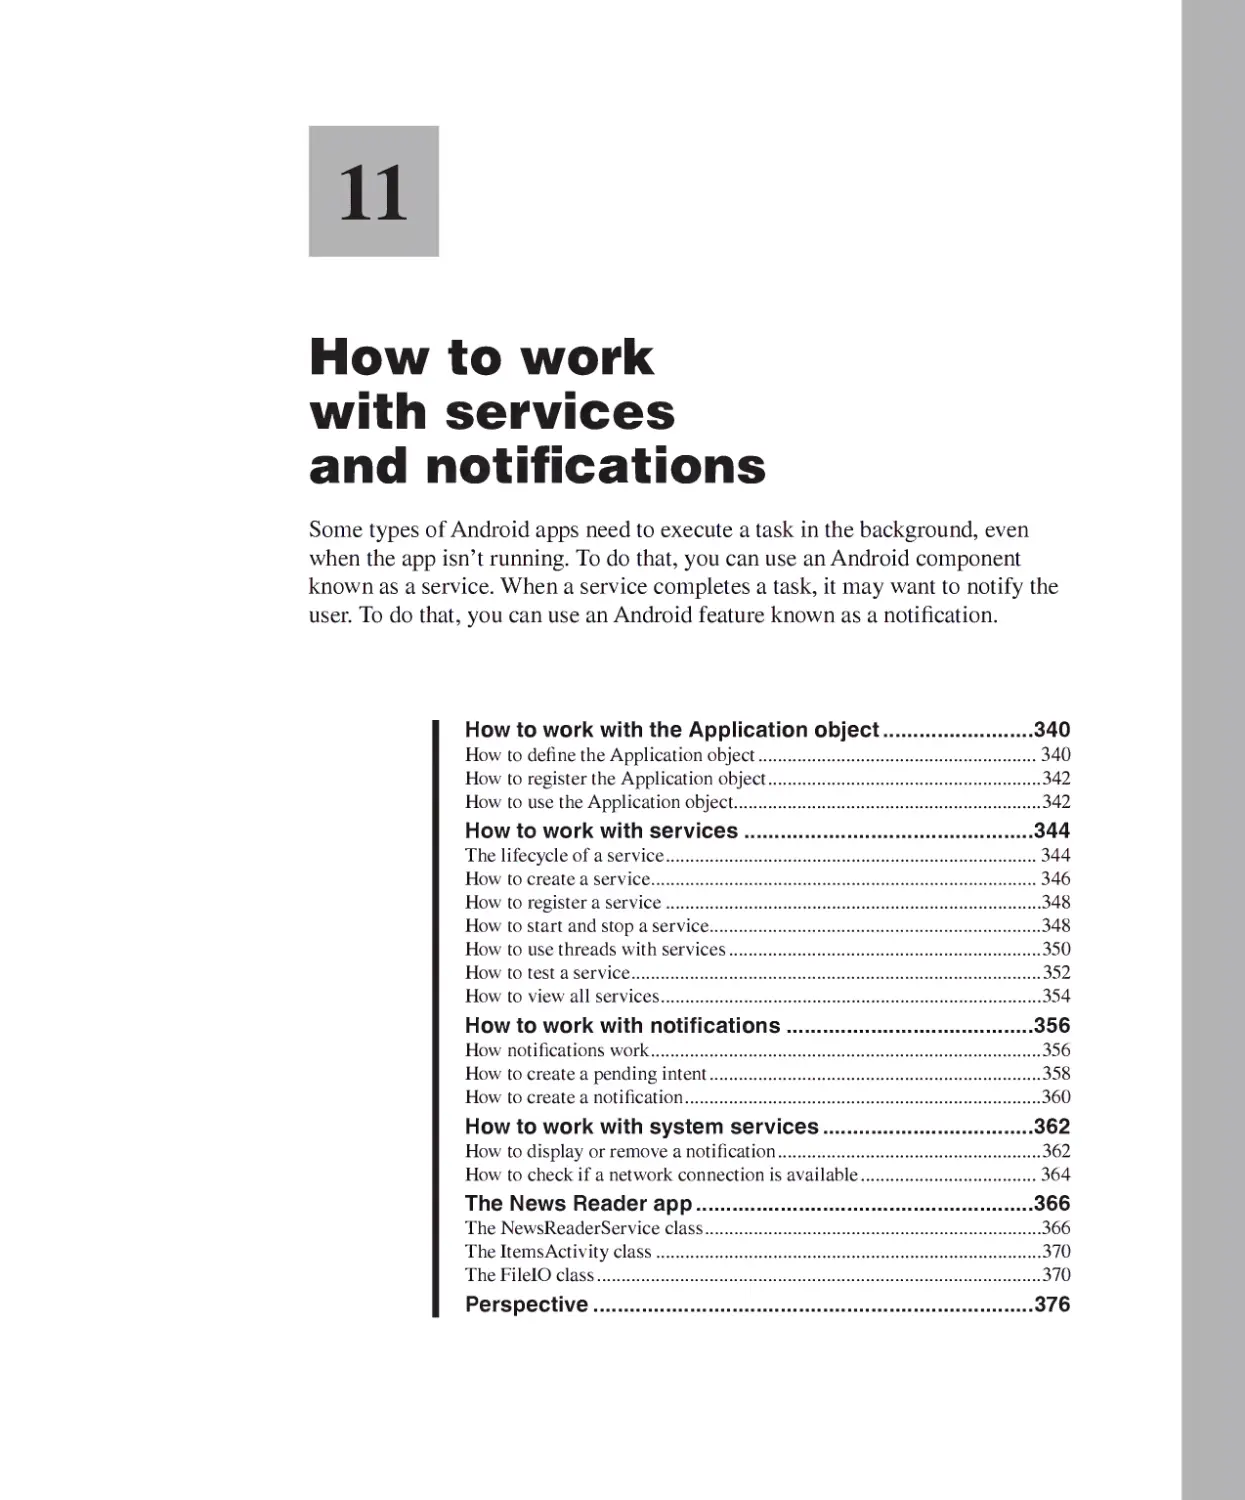 Chapter 11 - How to Work with Services and Notifications